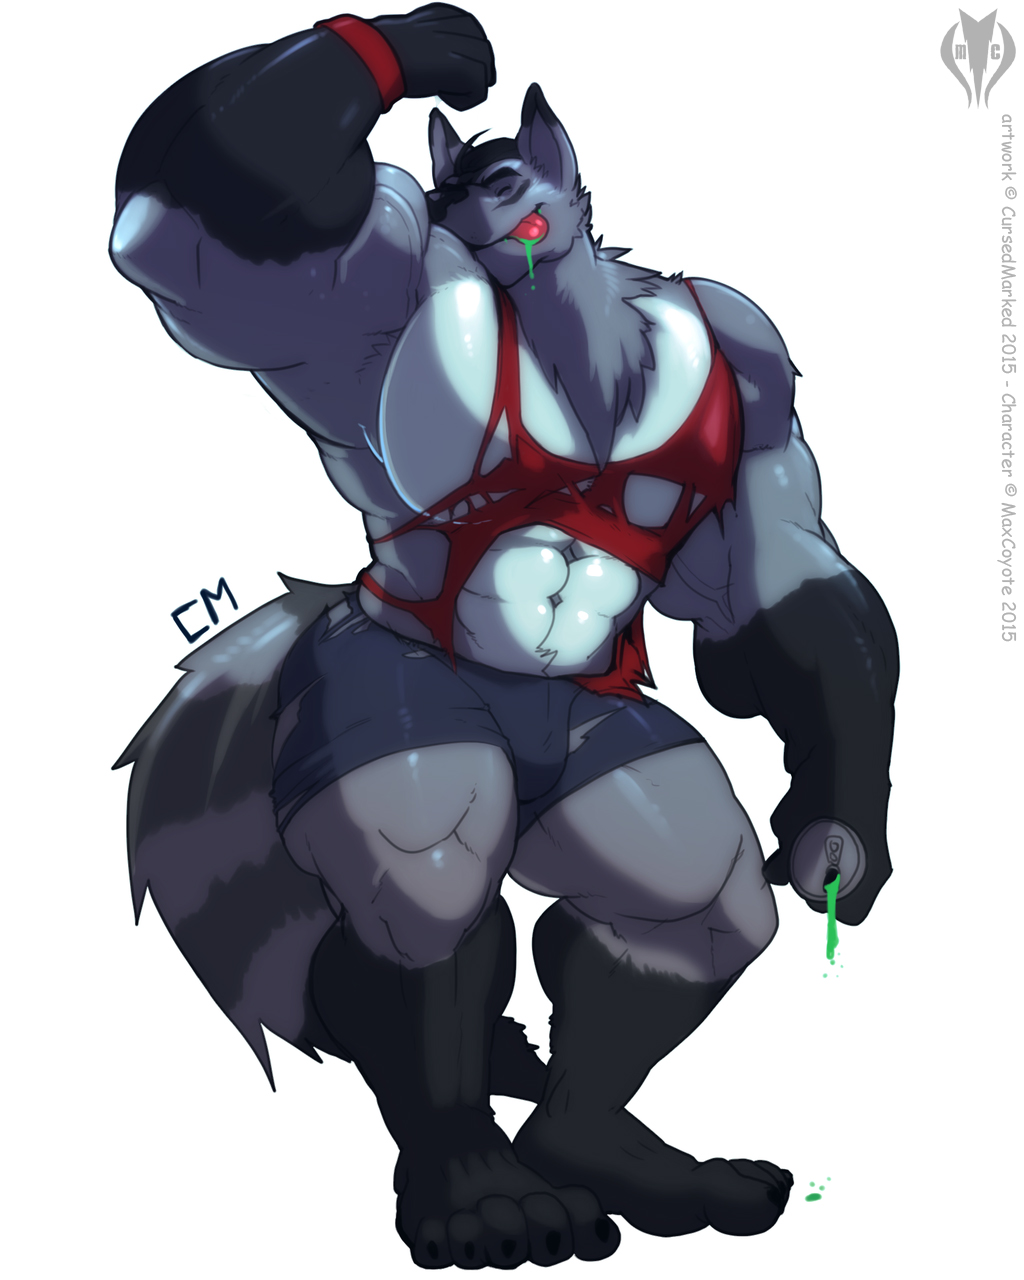 COM] Pump It Up (by CursedMarked) by MaxCoyote -- Fur Affinity [dot] net